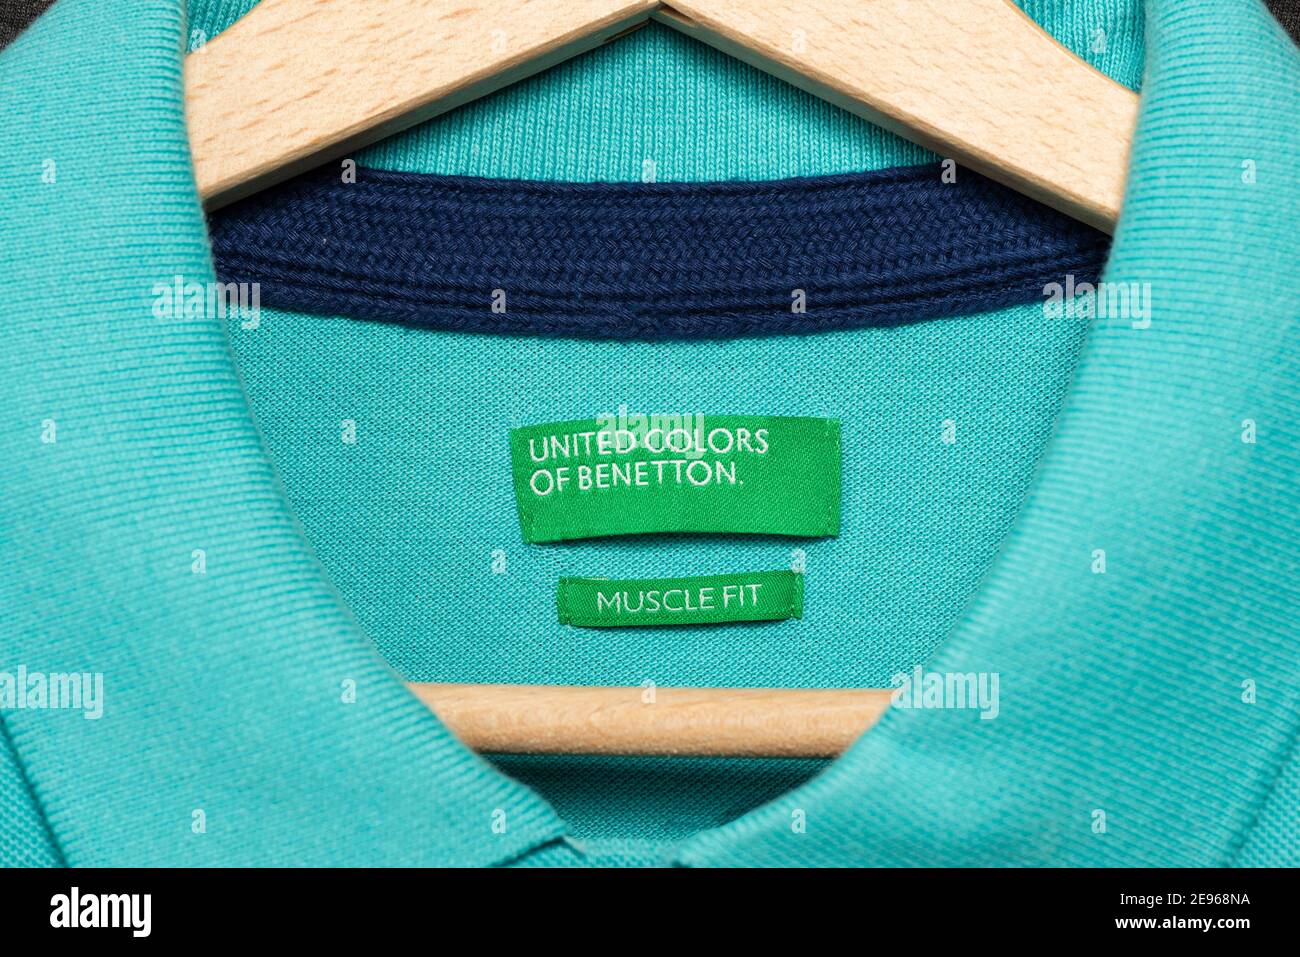 wooden of on hanging Fit label Photo shirt Benetton - Colors tee Stock Muscle hanger green United Alamy teal on